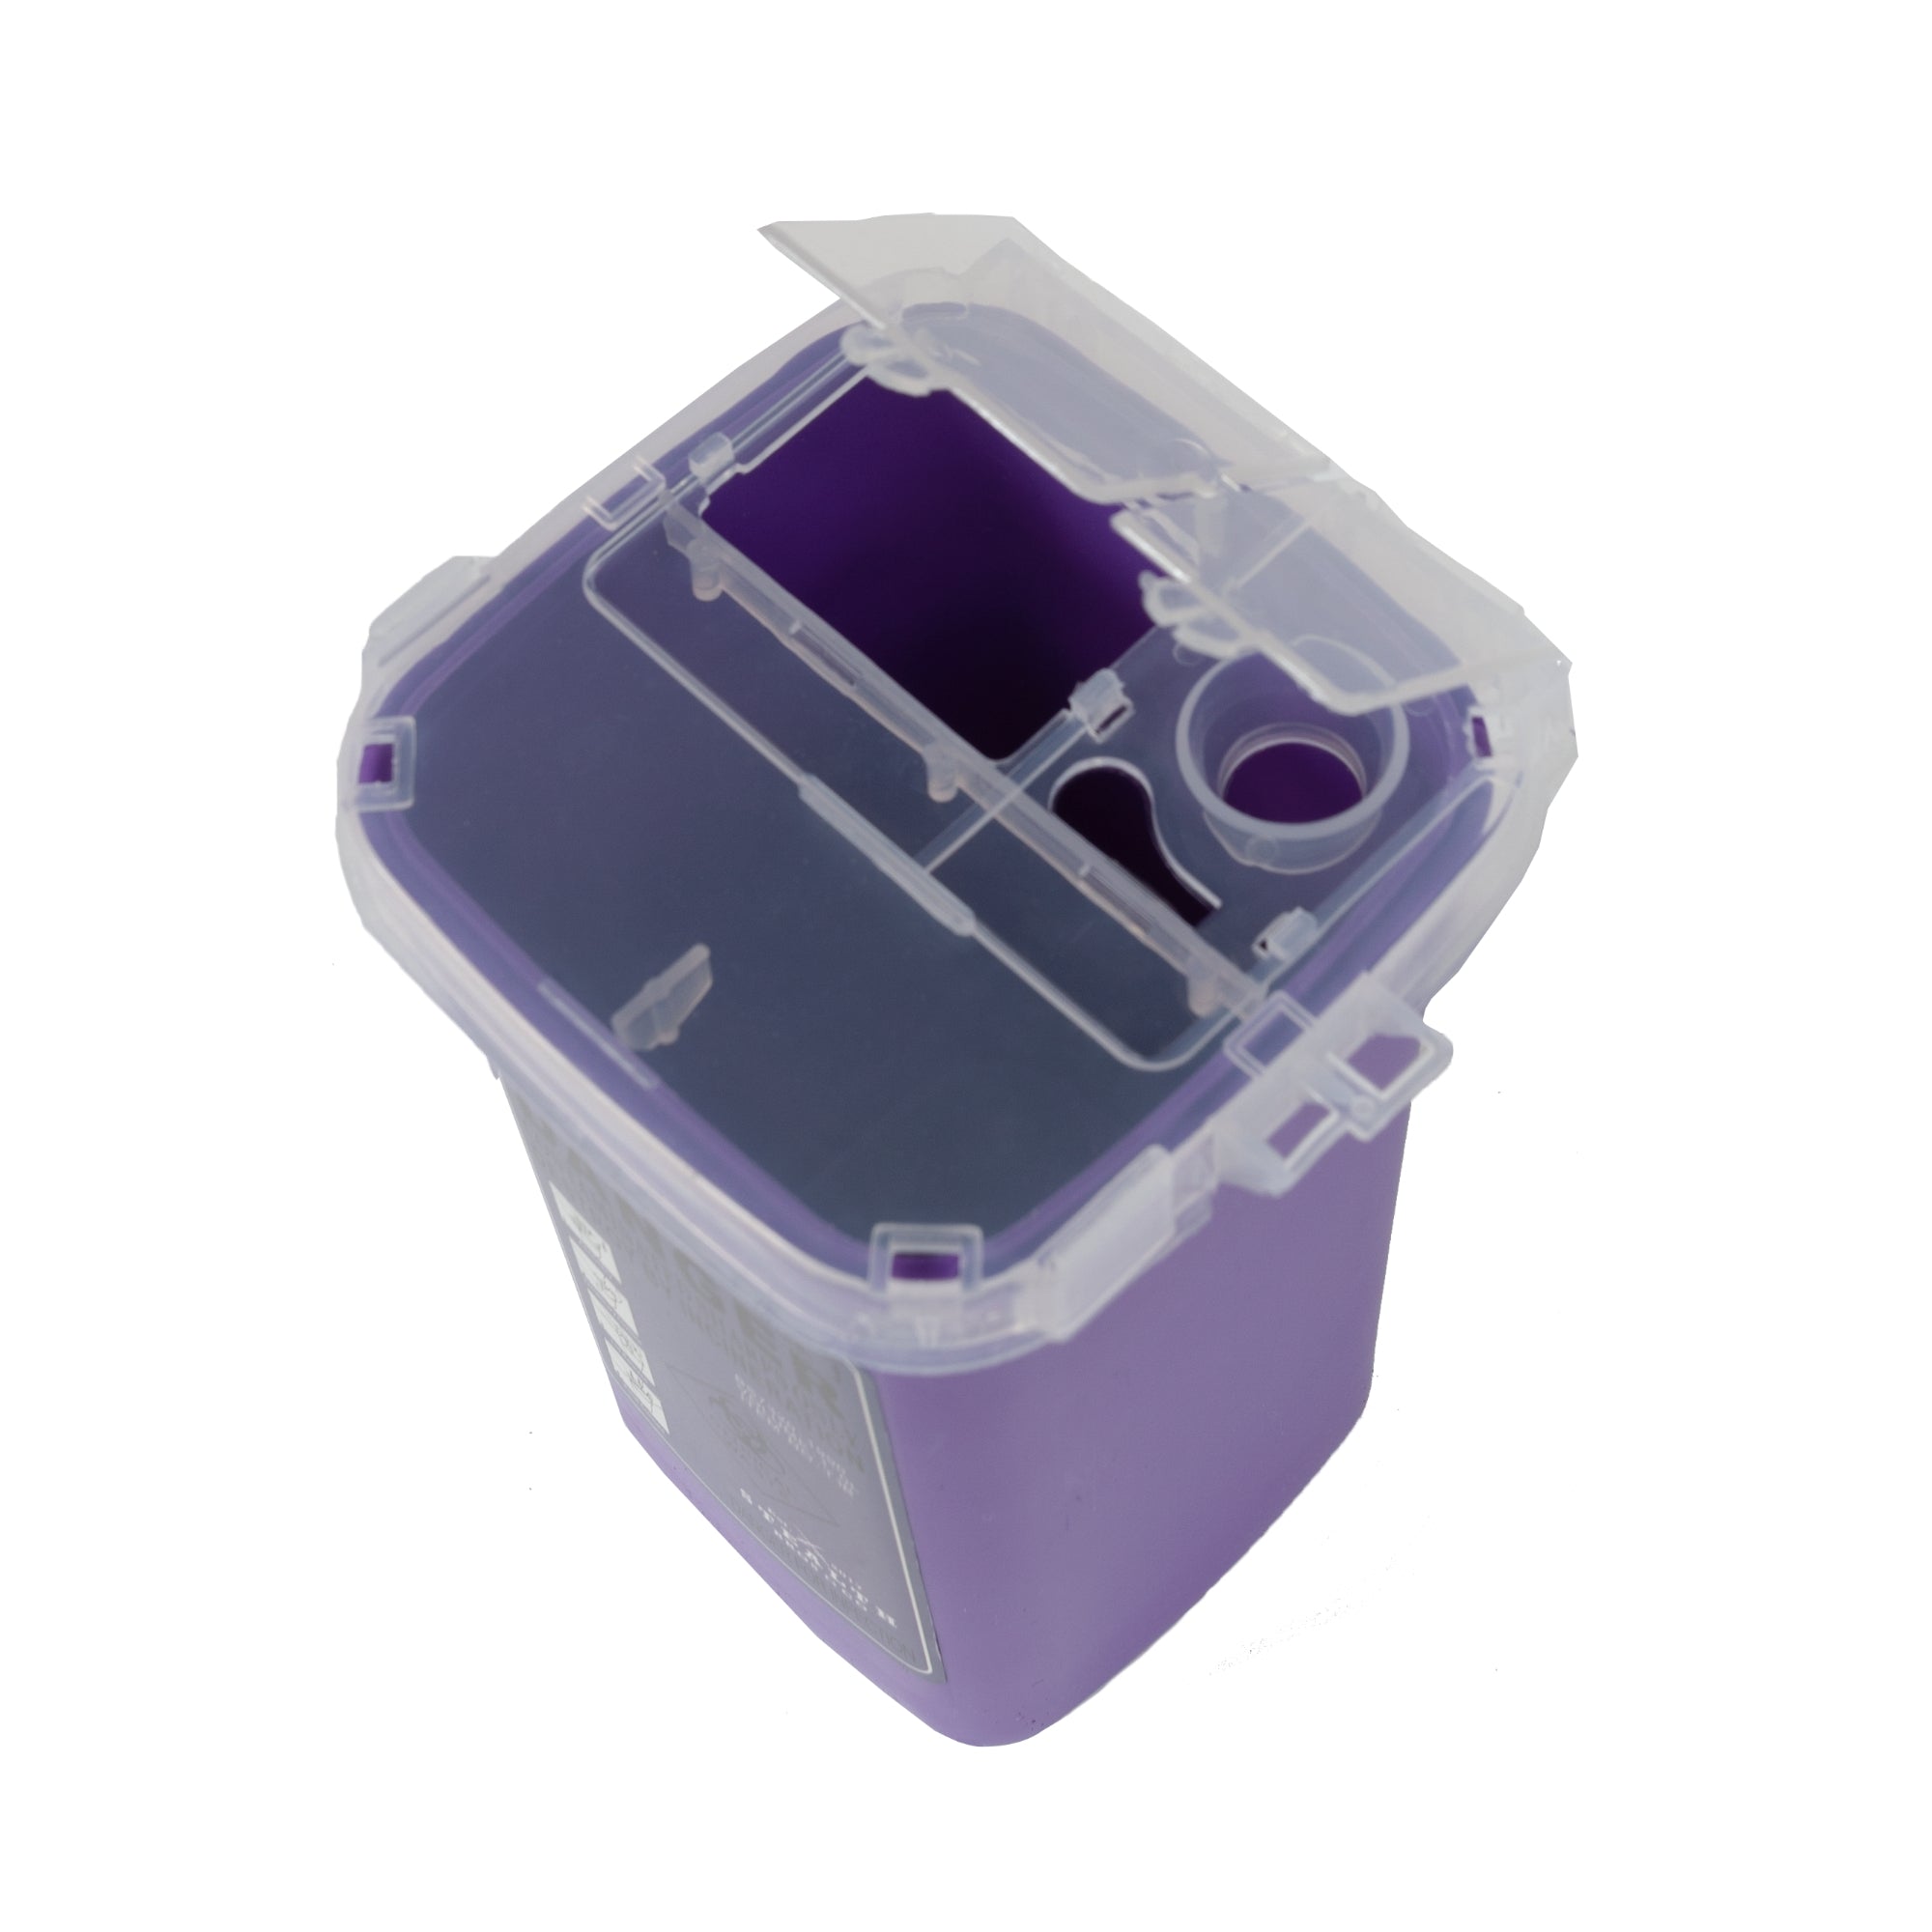 Stealth Purple Sharps Container